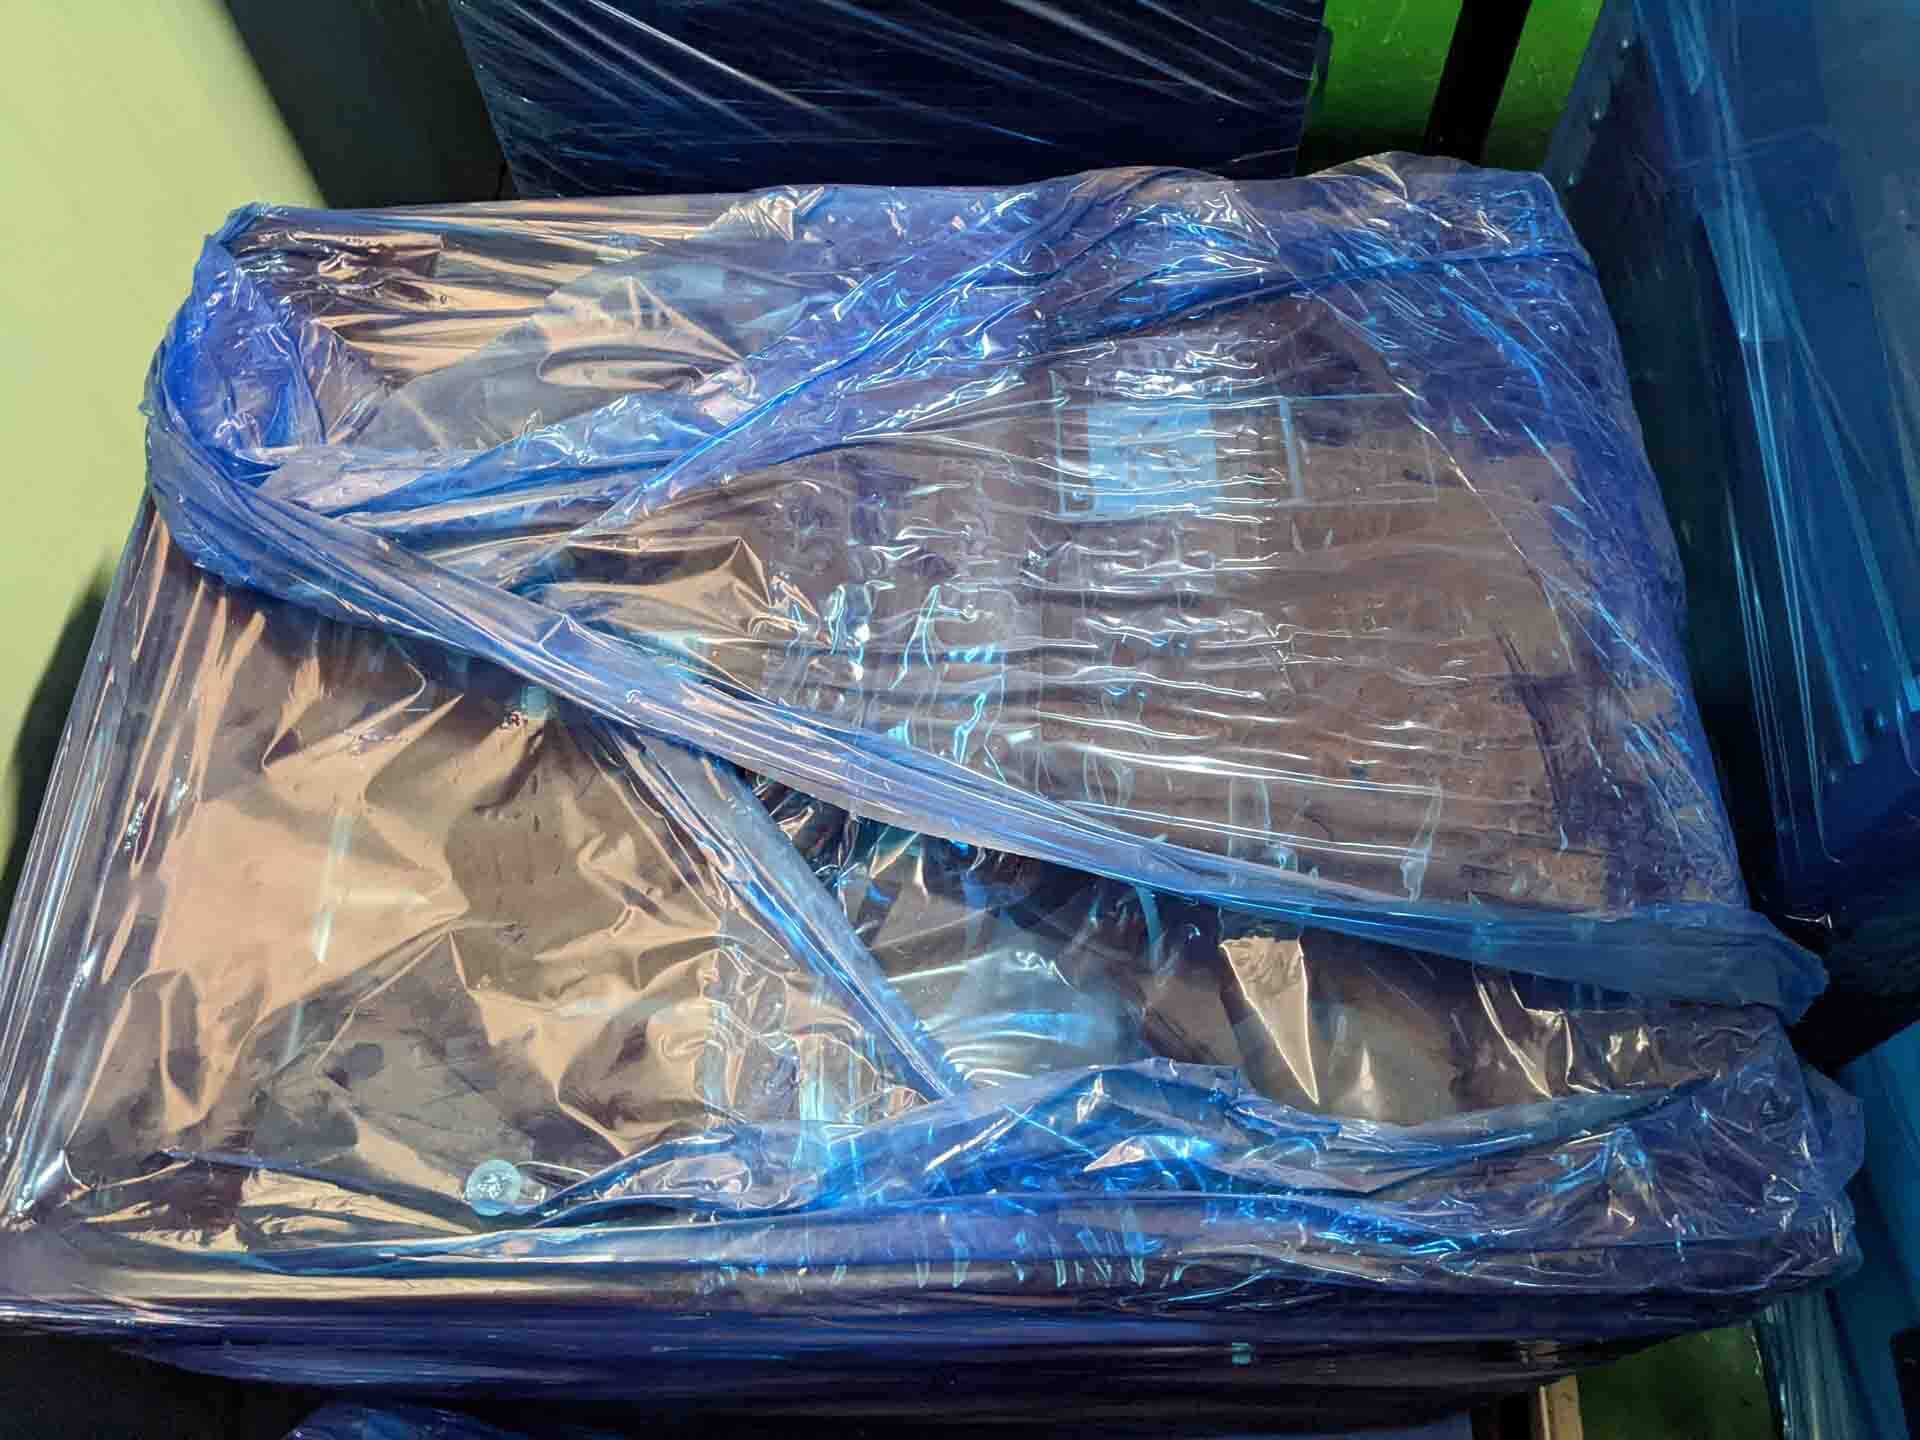 AMAT / APPLIED MATERIALS AMAT-1 Chiller used for sale price #293658032 ...